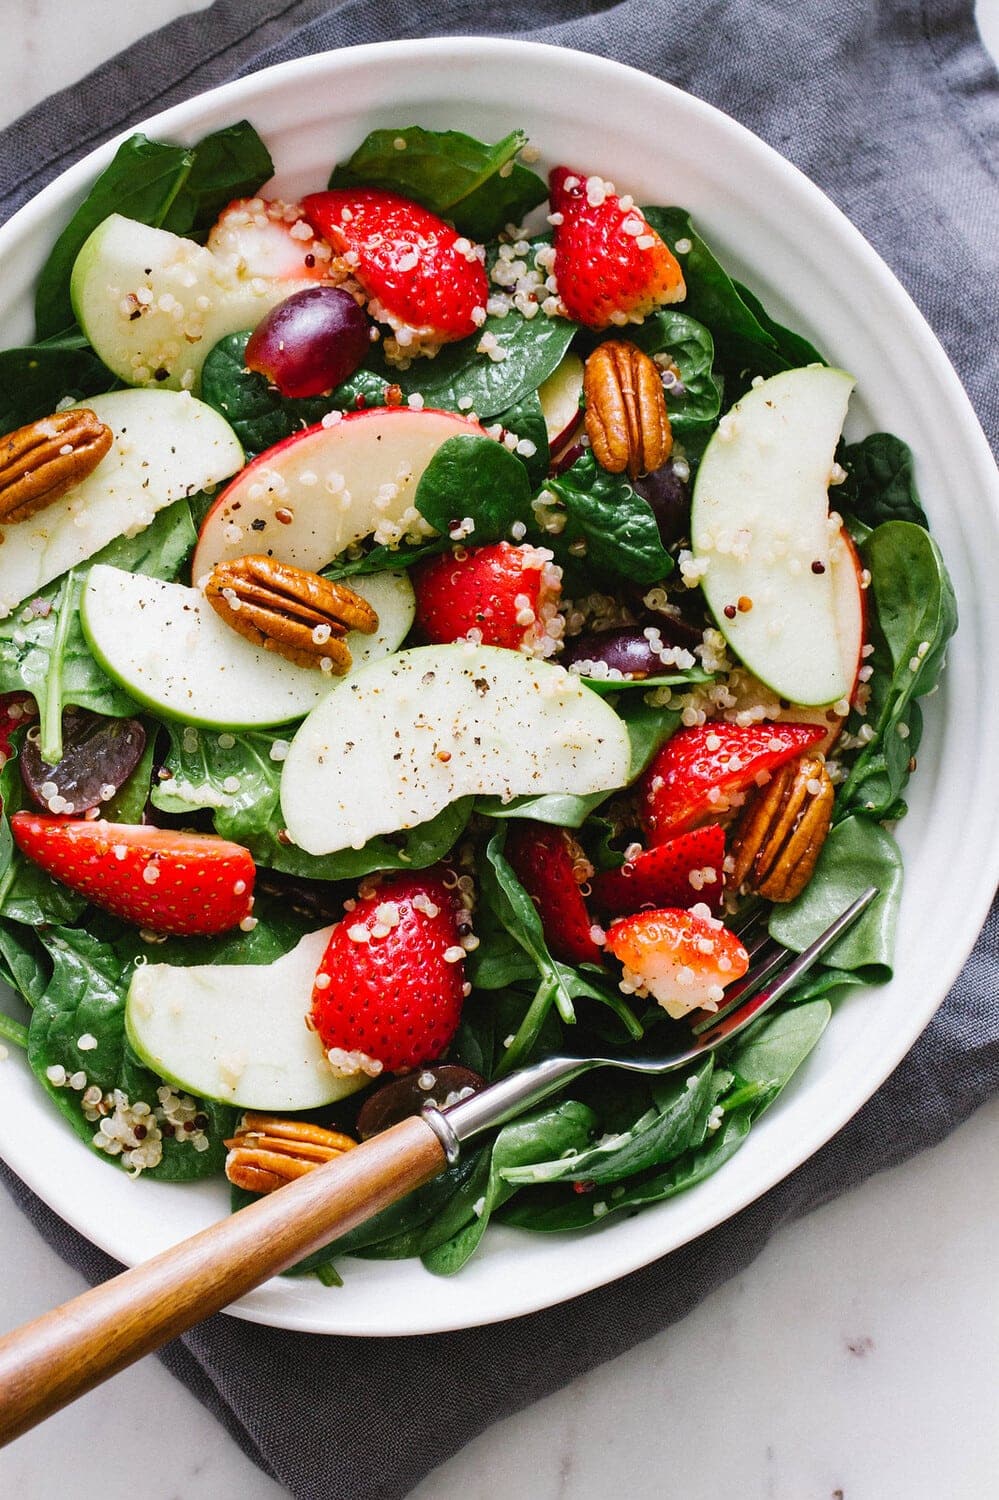 top down view of a spinach salad with strawberries, apples and quinoa in a serving bowl.